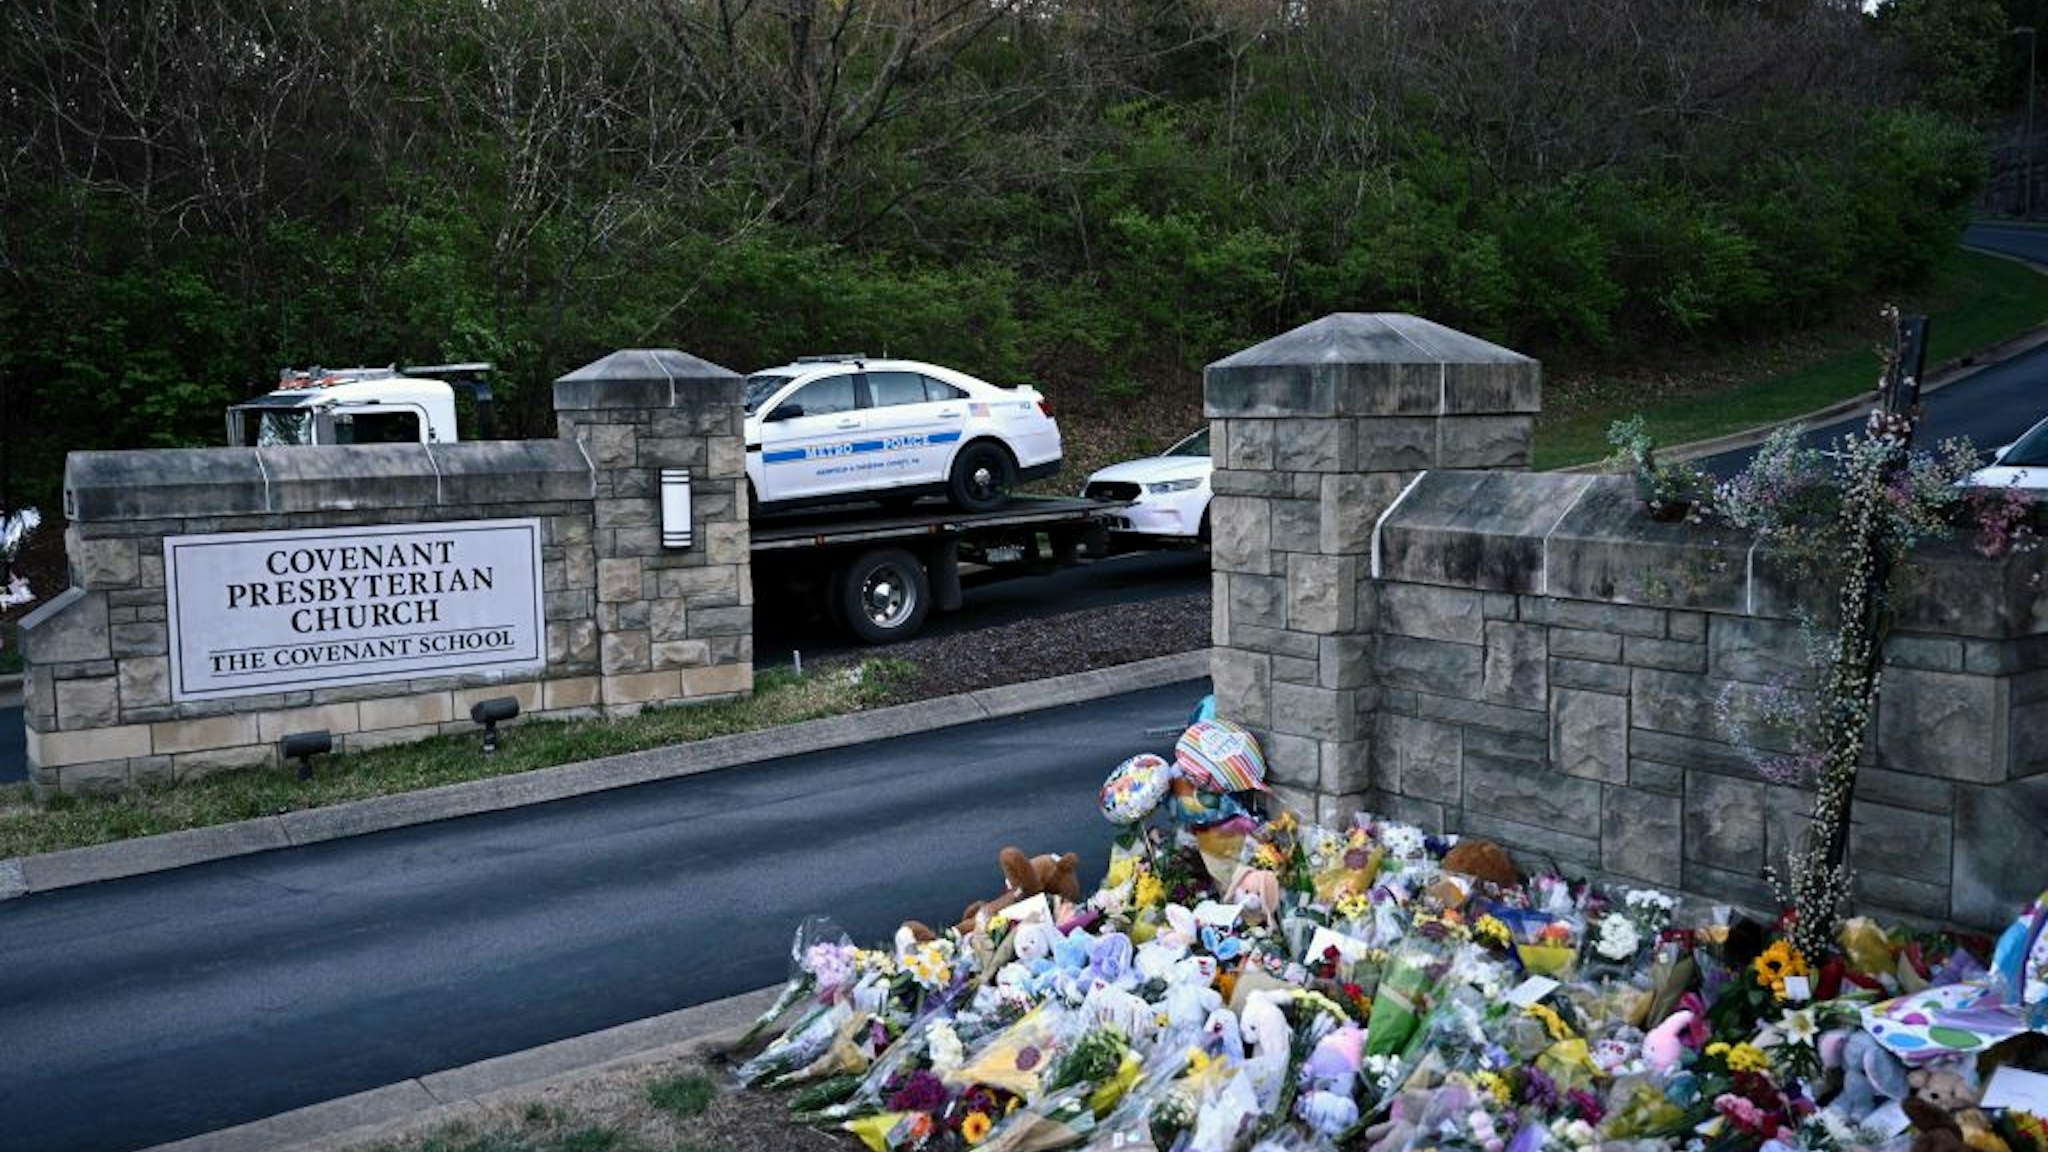 Police cars damaged during a shooting are removed from the Covenant School campus, in Nashville, Tennessee, March 28, 2023. - A heavily armed former student killed three young children and three staff in what appeared to be a carefully planned attack at a private elementary school in Nashville on Monday, before being shot dead by police. Chief of Police John Drake named the suspect as Audrey Hale, 28, who the officer later said identified as transgender. (Photo by Brendan SMIALOWSKI / AFP)